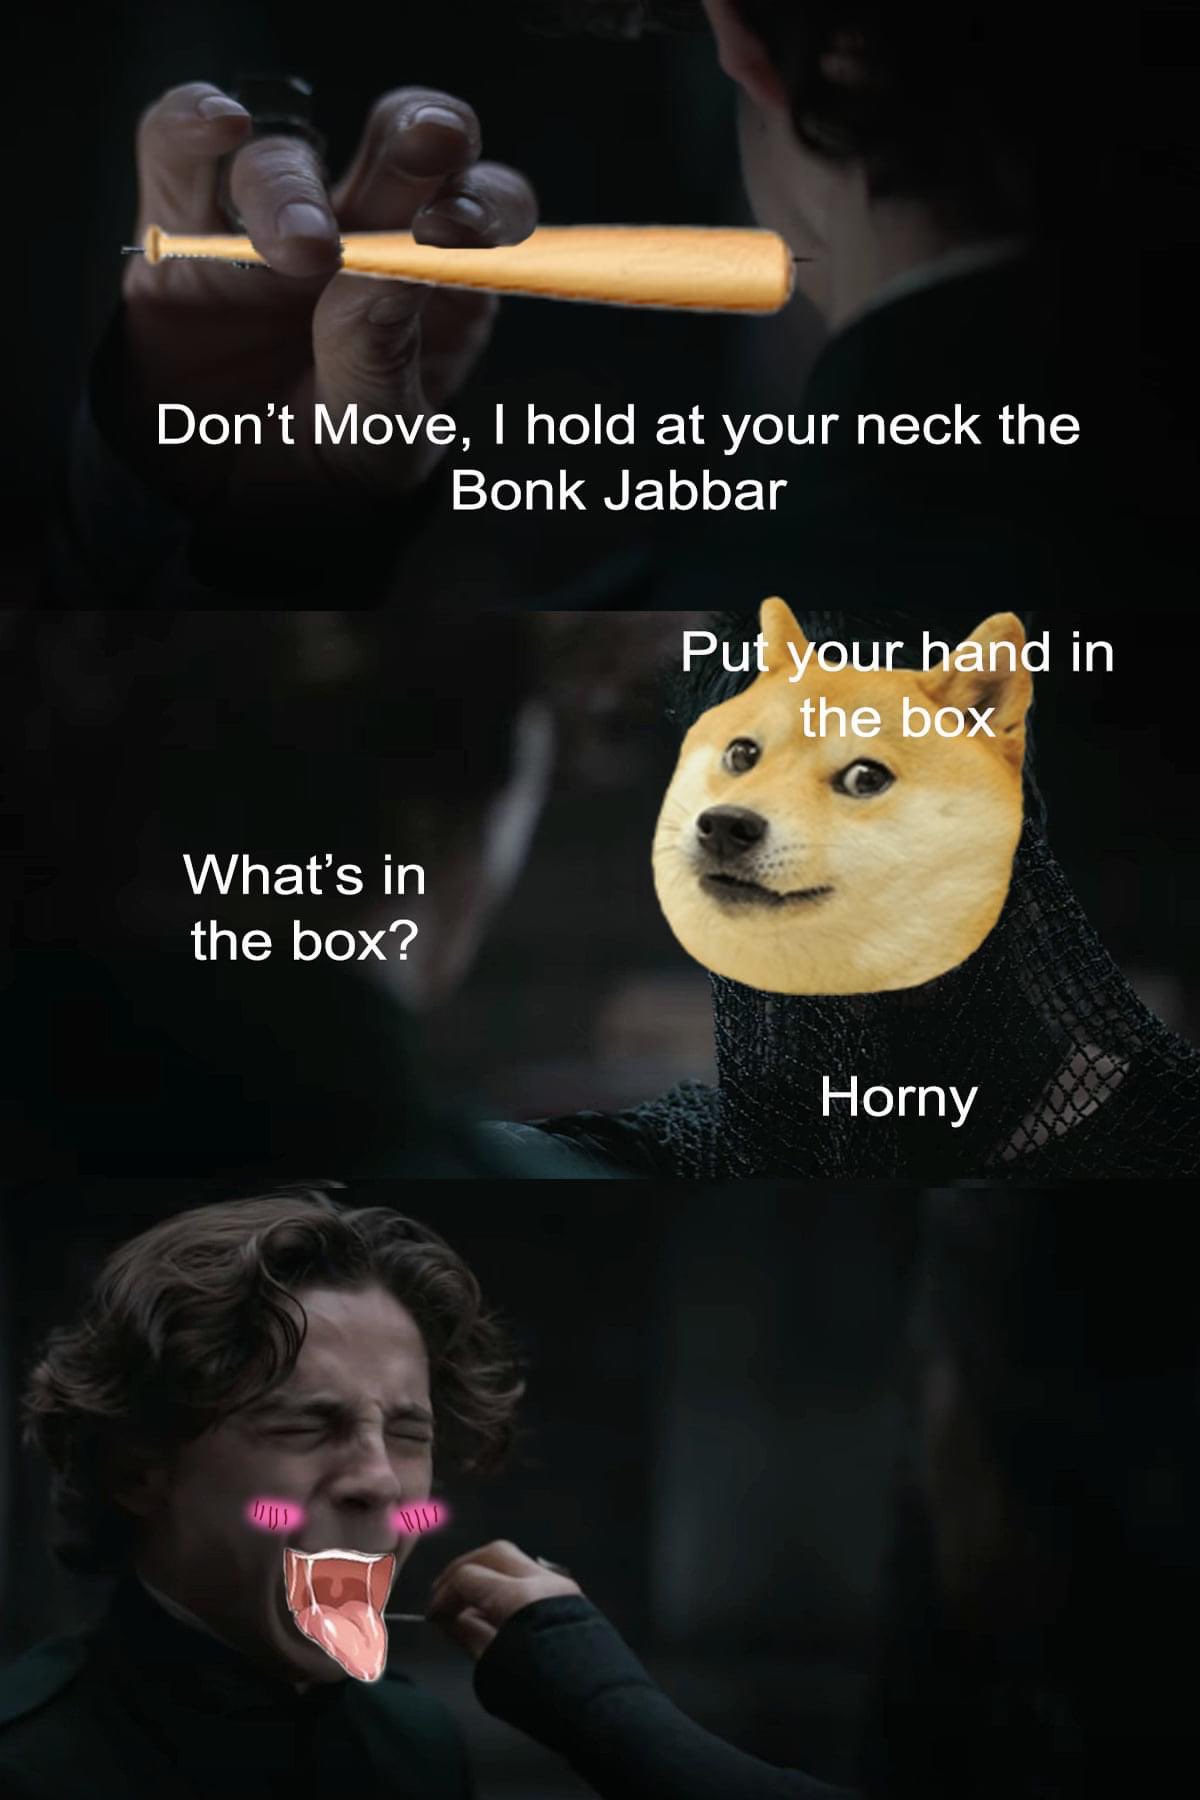 dune memes  - doge - Don't Move, I hold at your neck the Bonk Jabbar Put your hand in the box What's in the box? Horny